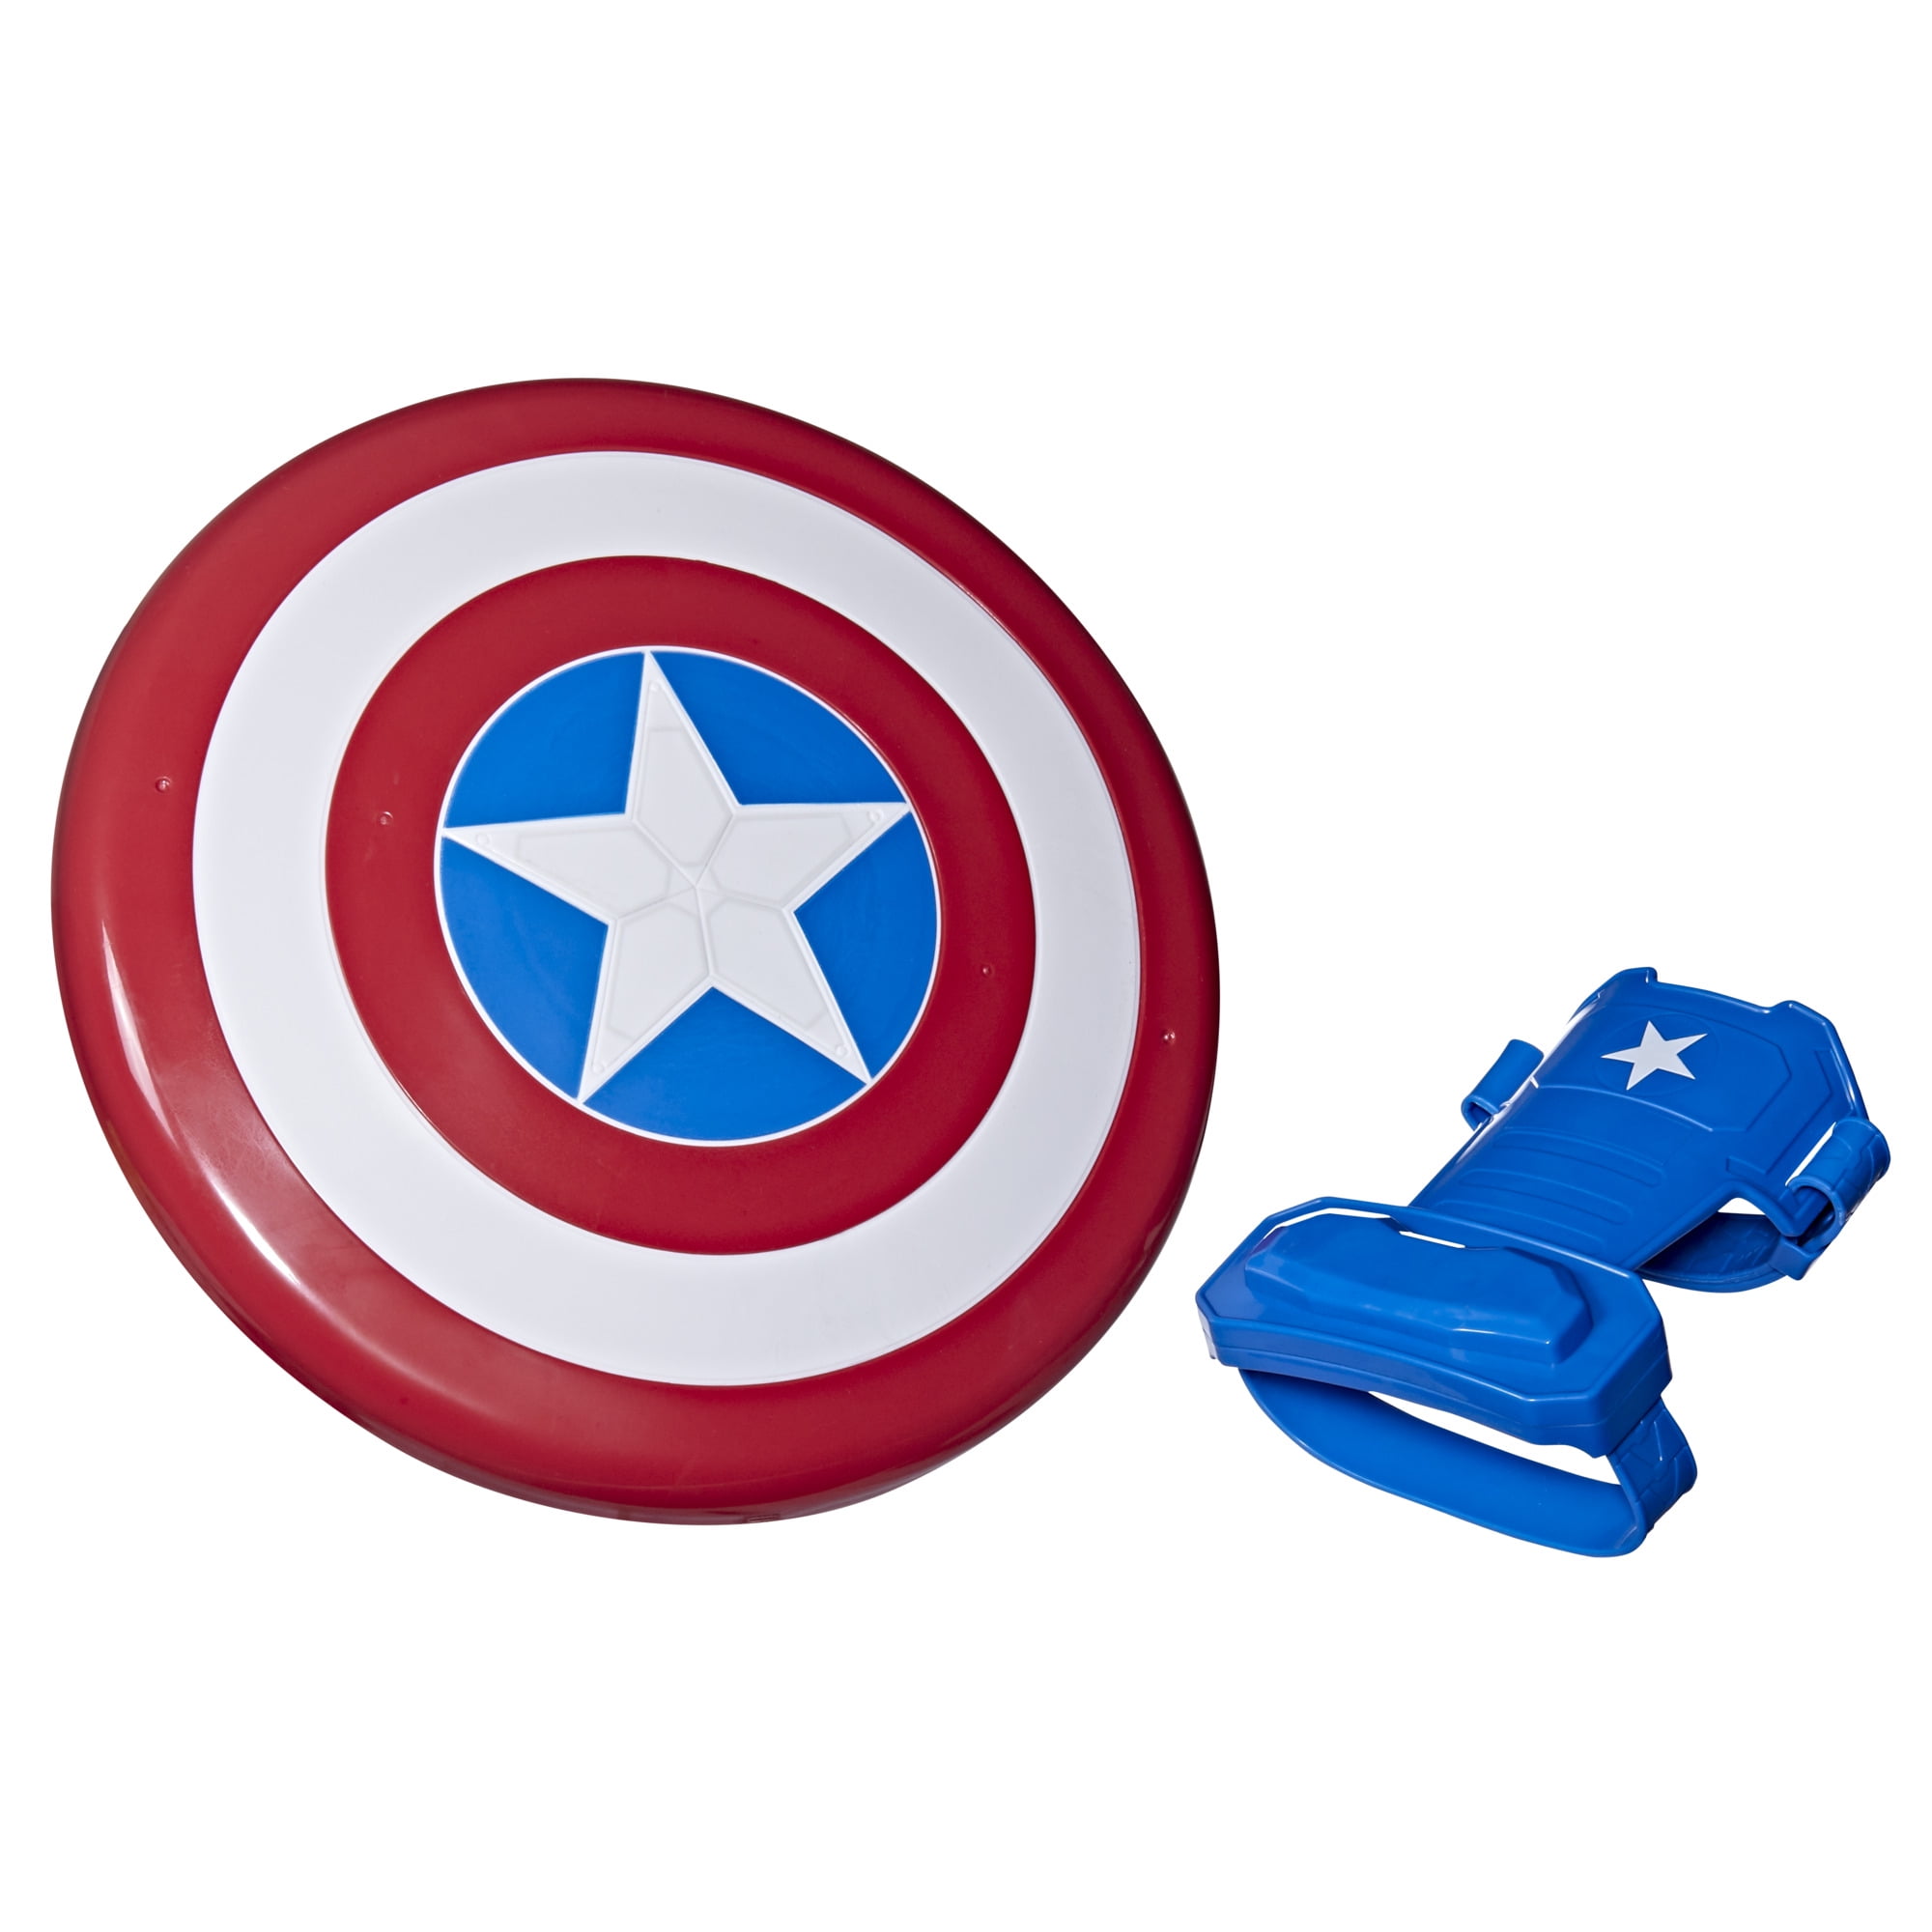 So they added CAP'S SHIELD to Roblox Fall of Heroes.. 